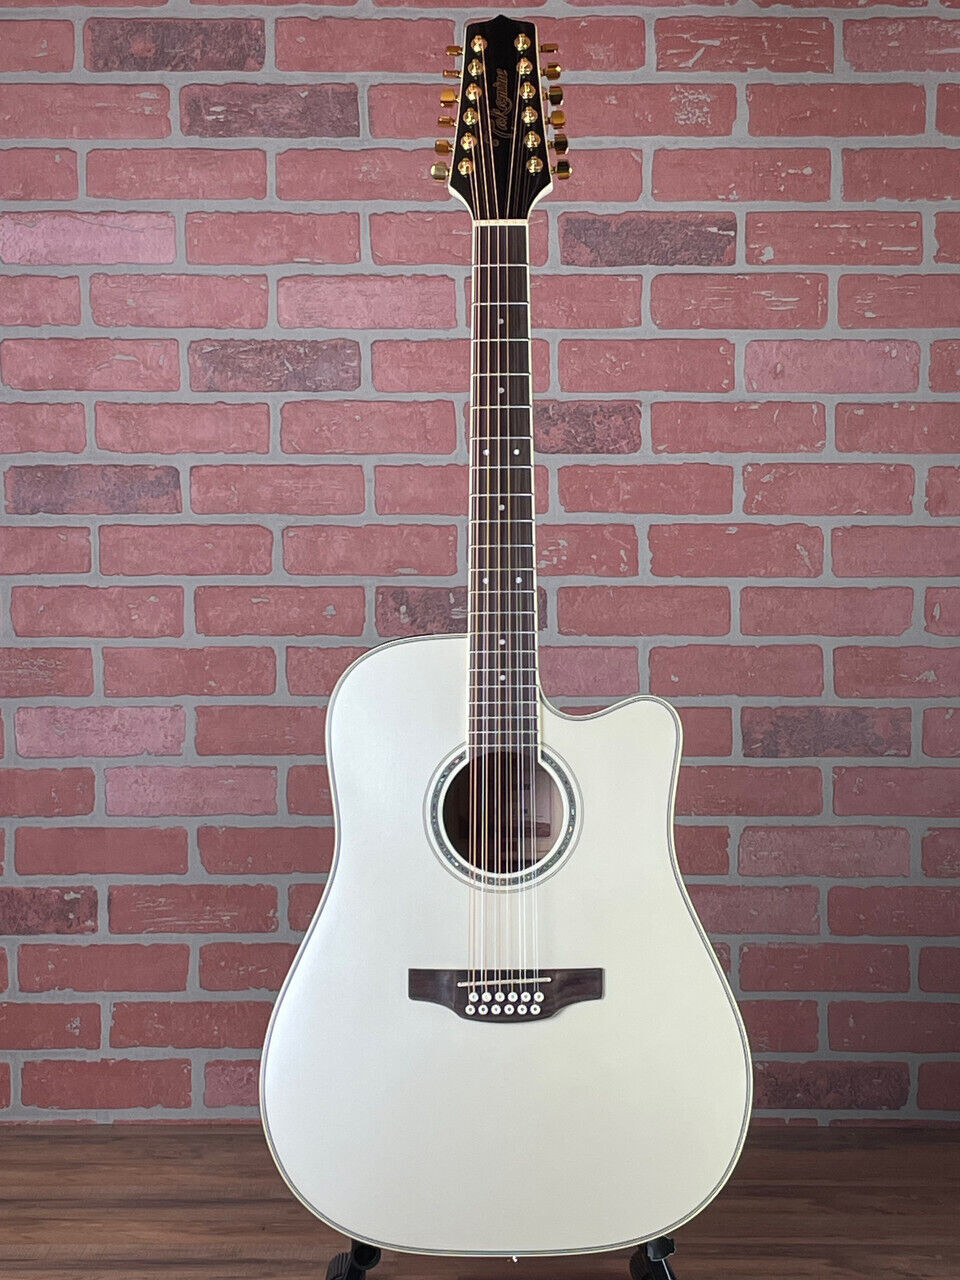 Takamine GD-37CE PW 12-string Acoustic-electric Guitar - Pearl White